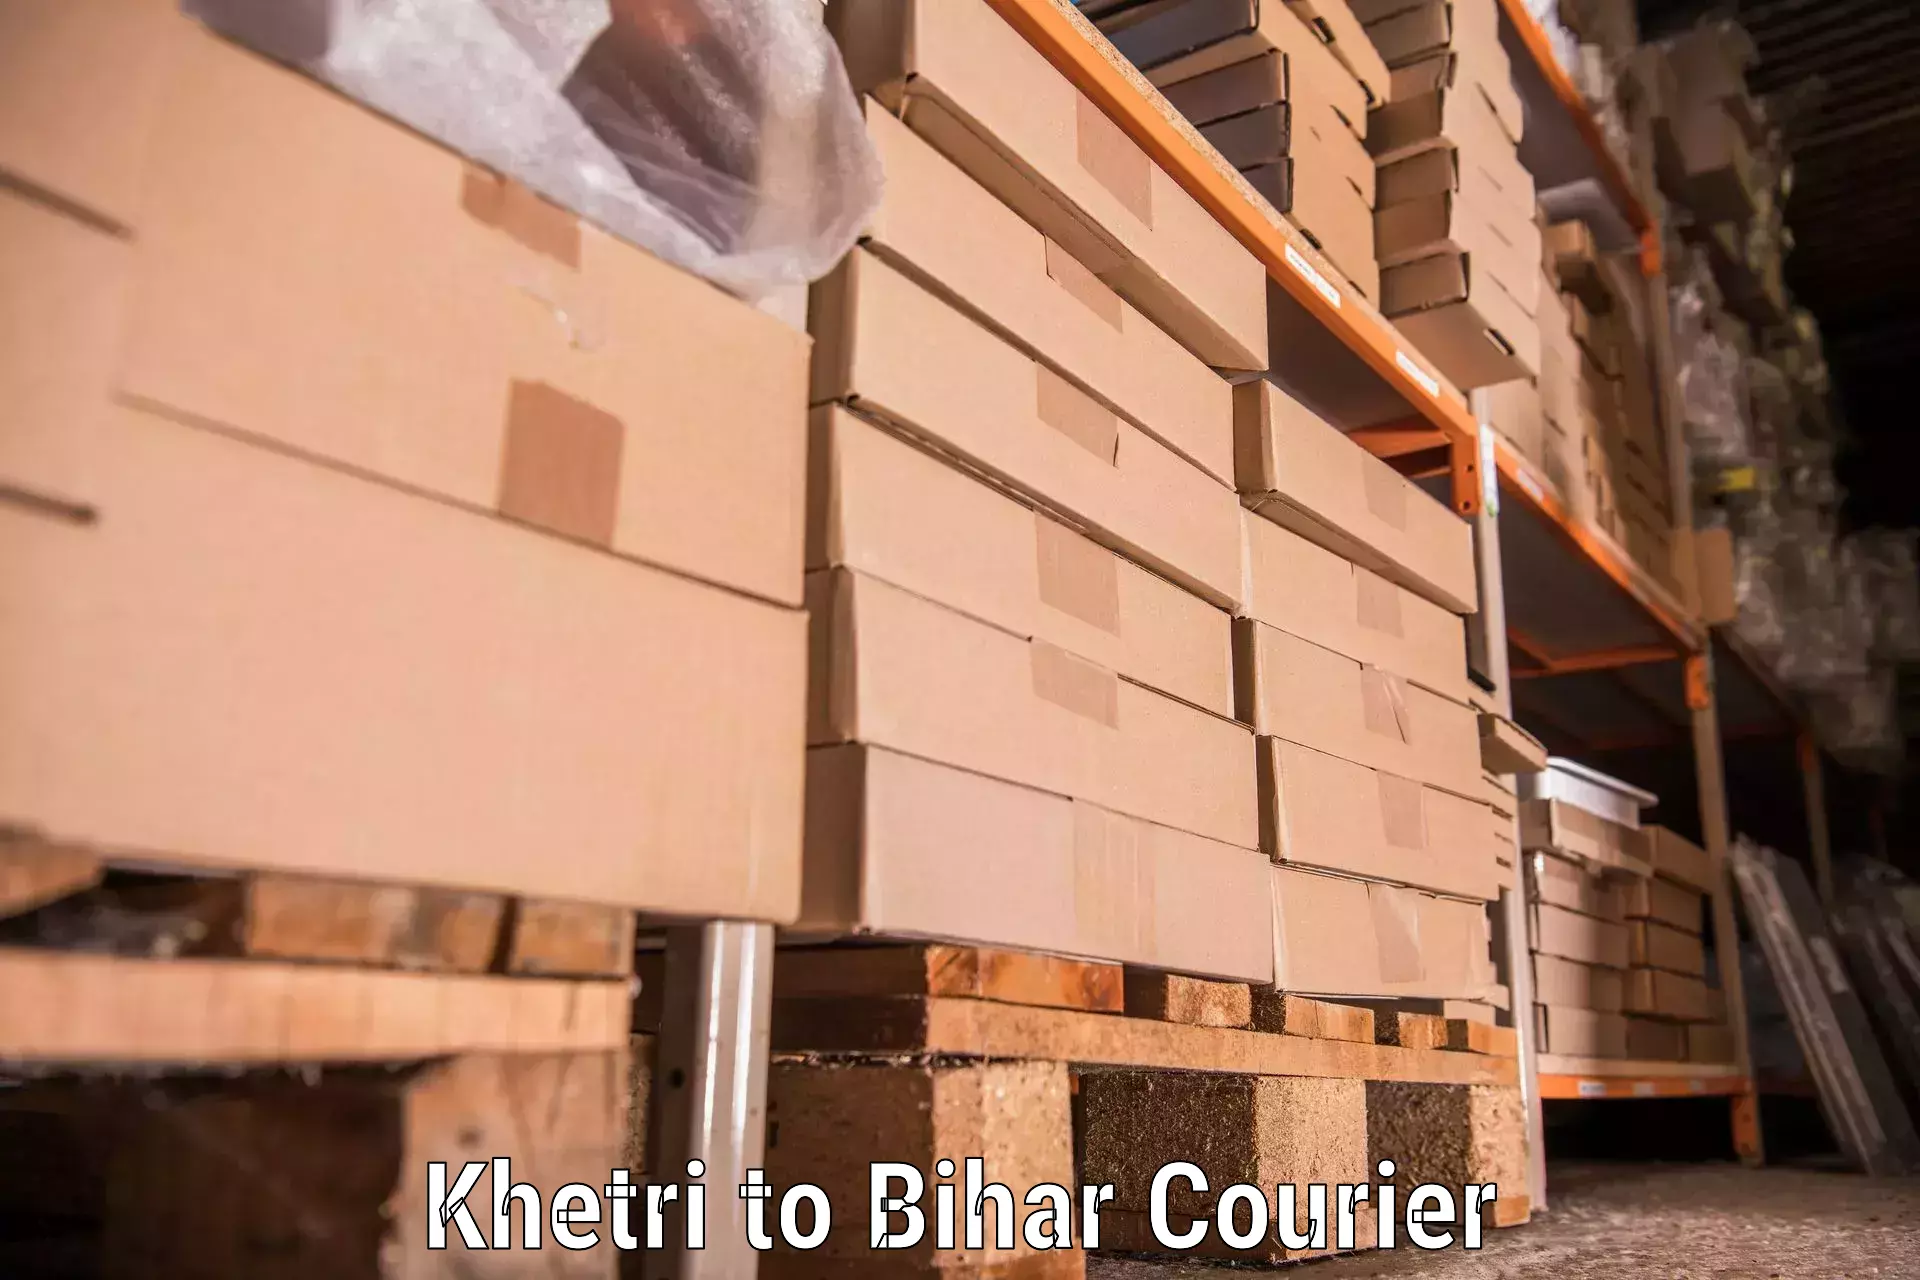 Trusted relocation experts Khetri to Bihar